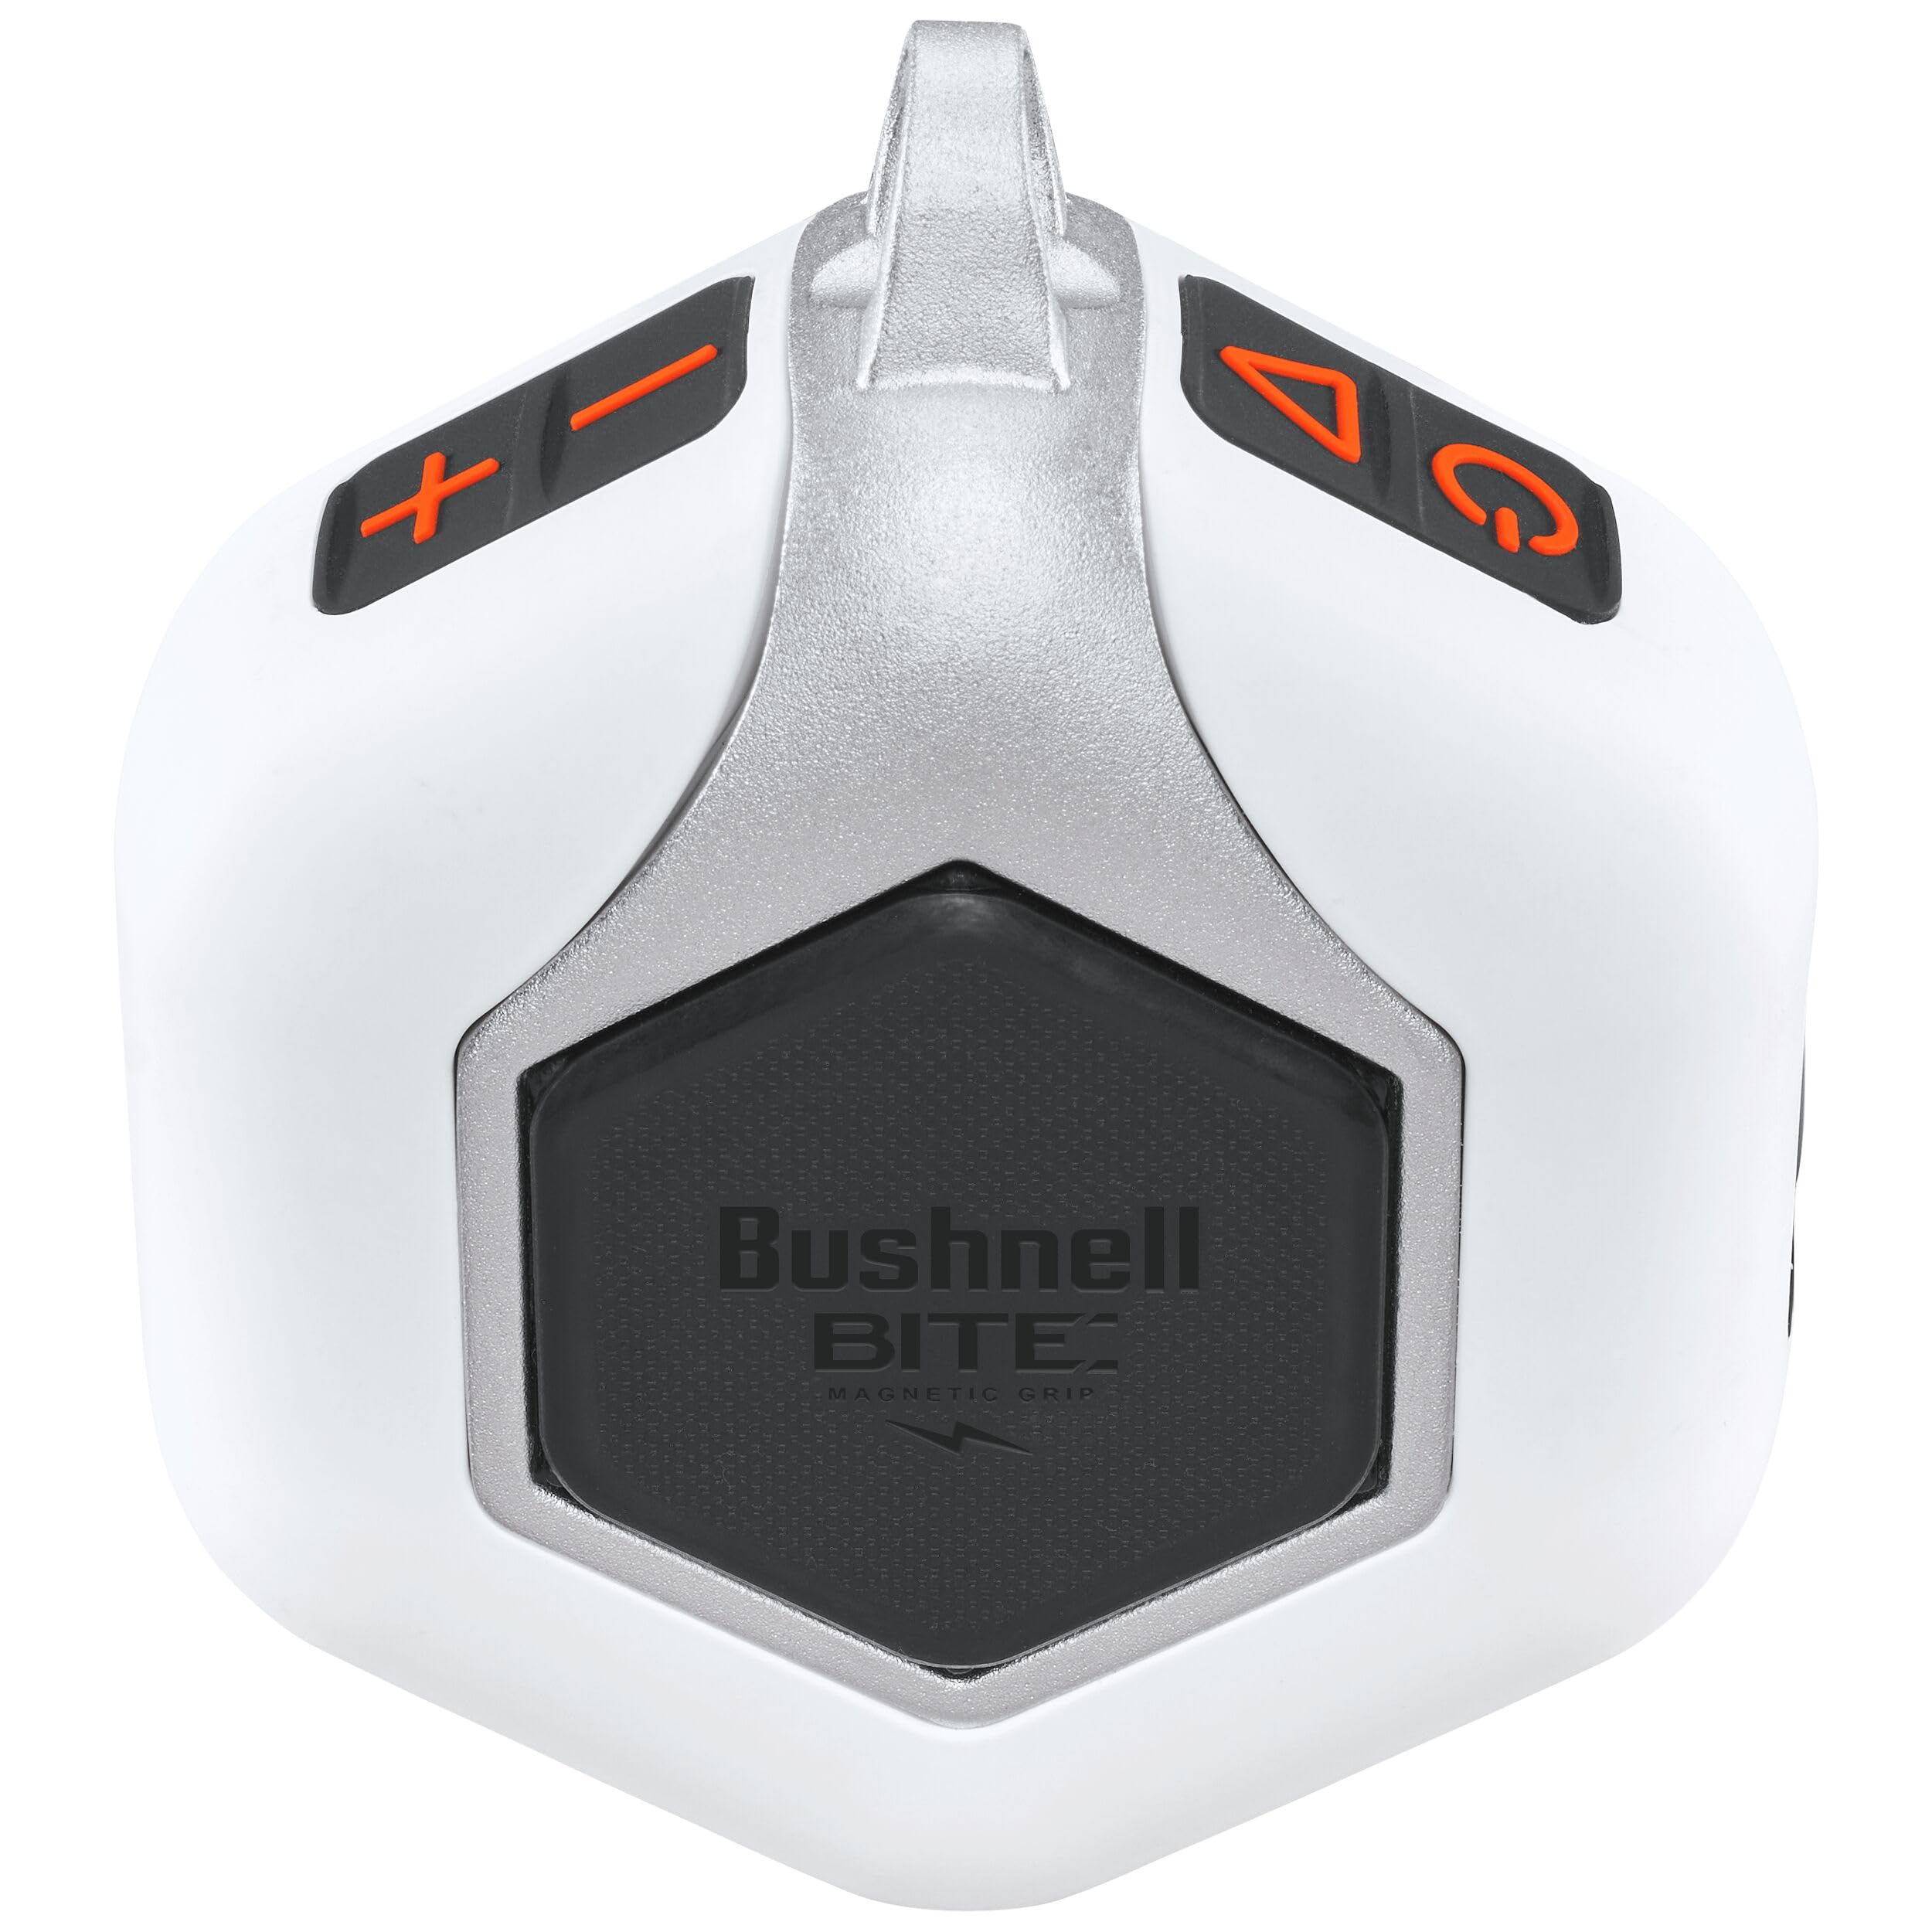 Bushnell Golf Wingman Mini GPS Speaker - Audible & Accurate Distances, Multiple Mounting Options for Cart or Walking (White/Orange)